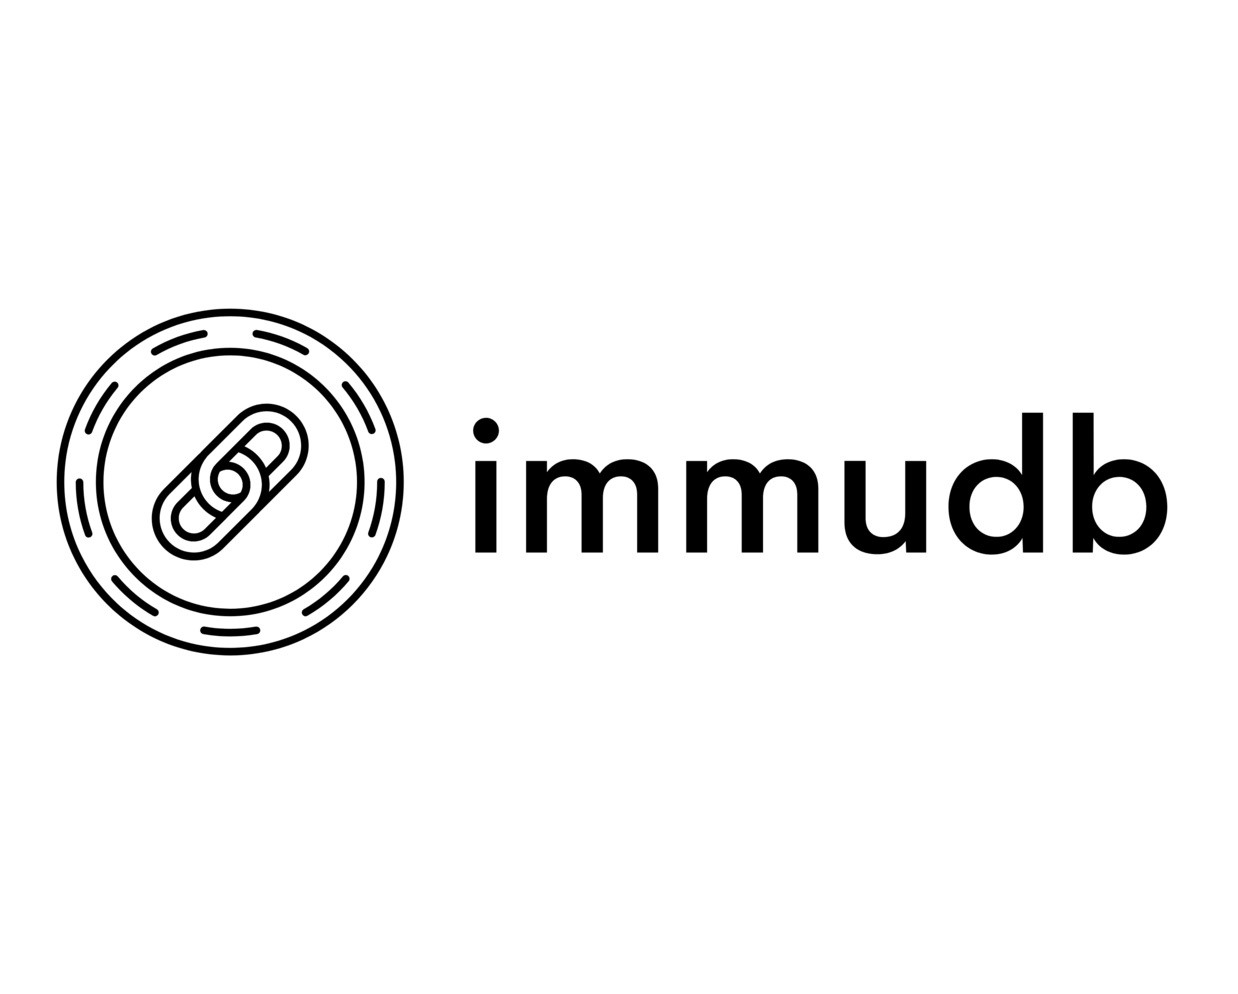 immudb 1.4 Comes With FIPS-Compliant Builds, Synchronous Replication